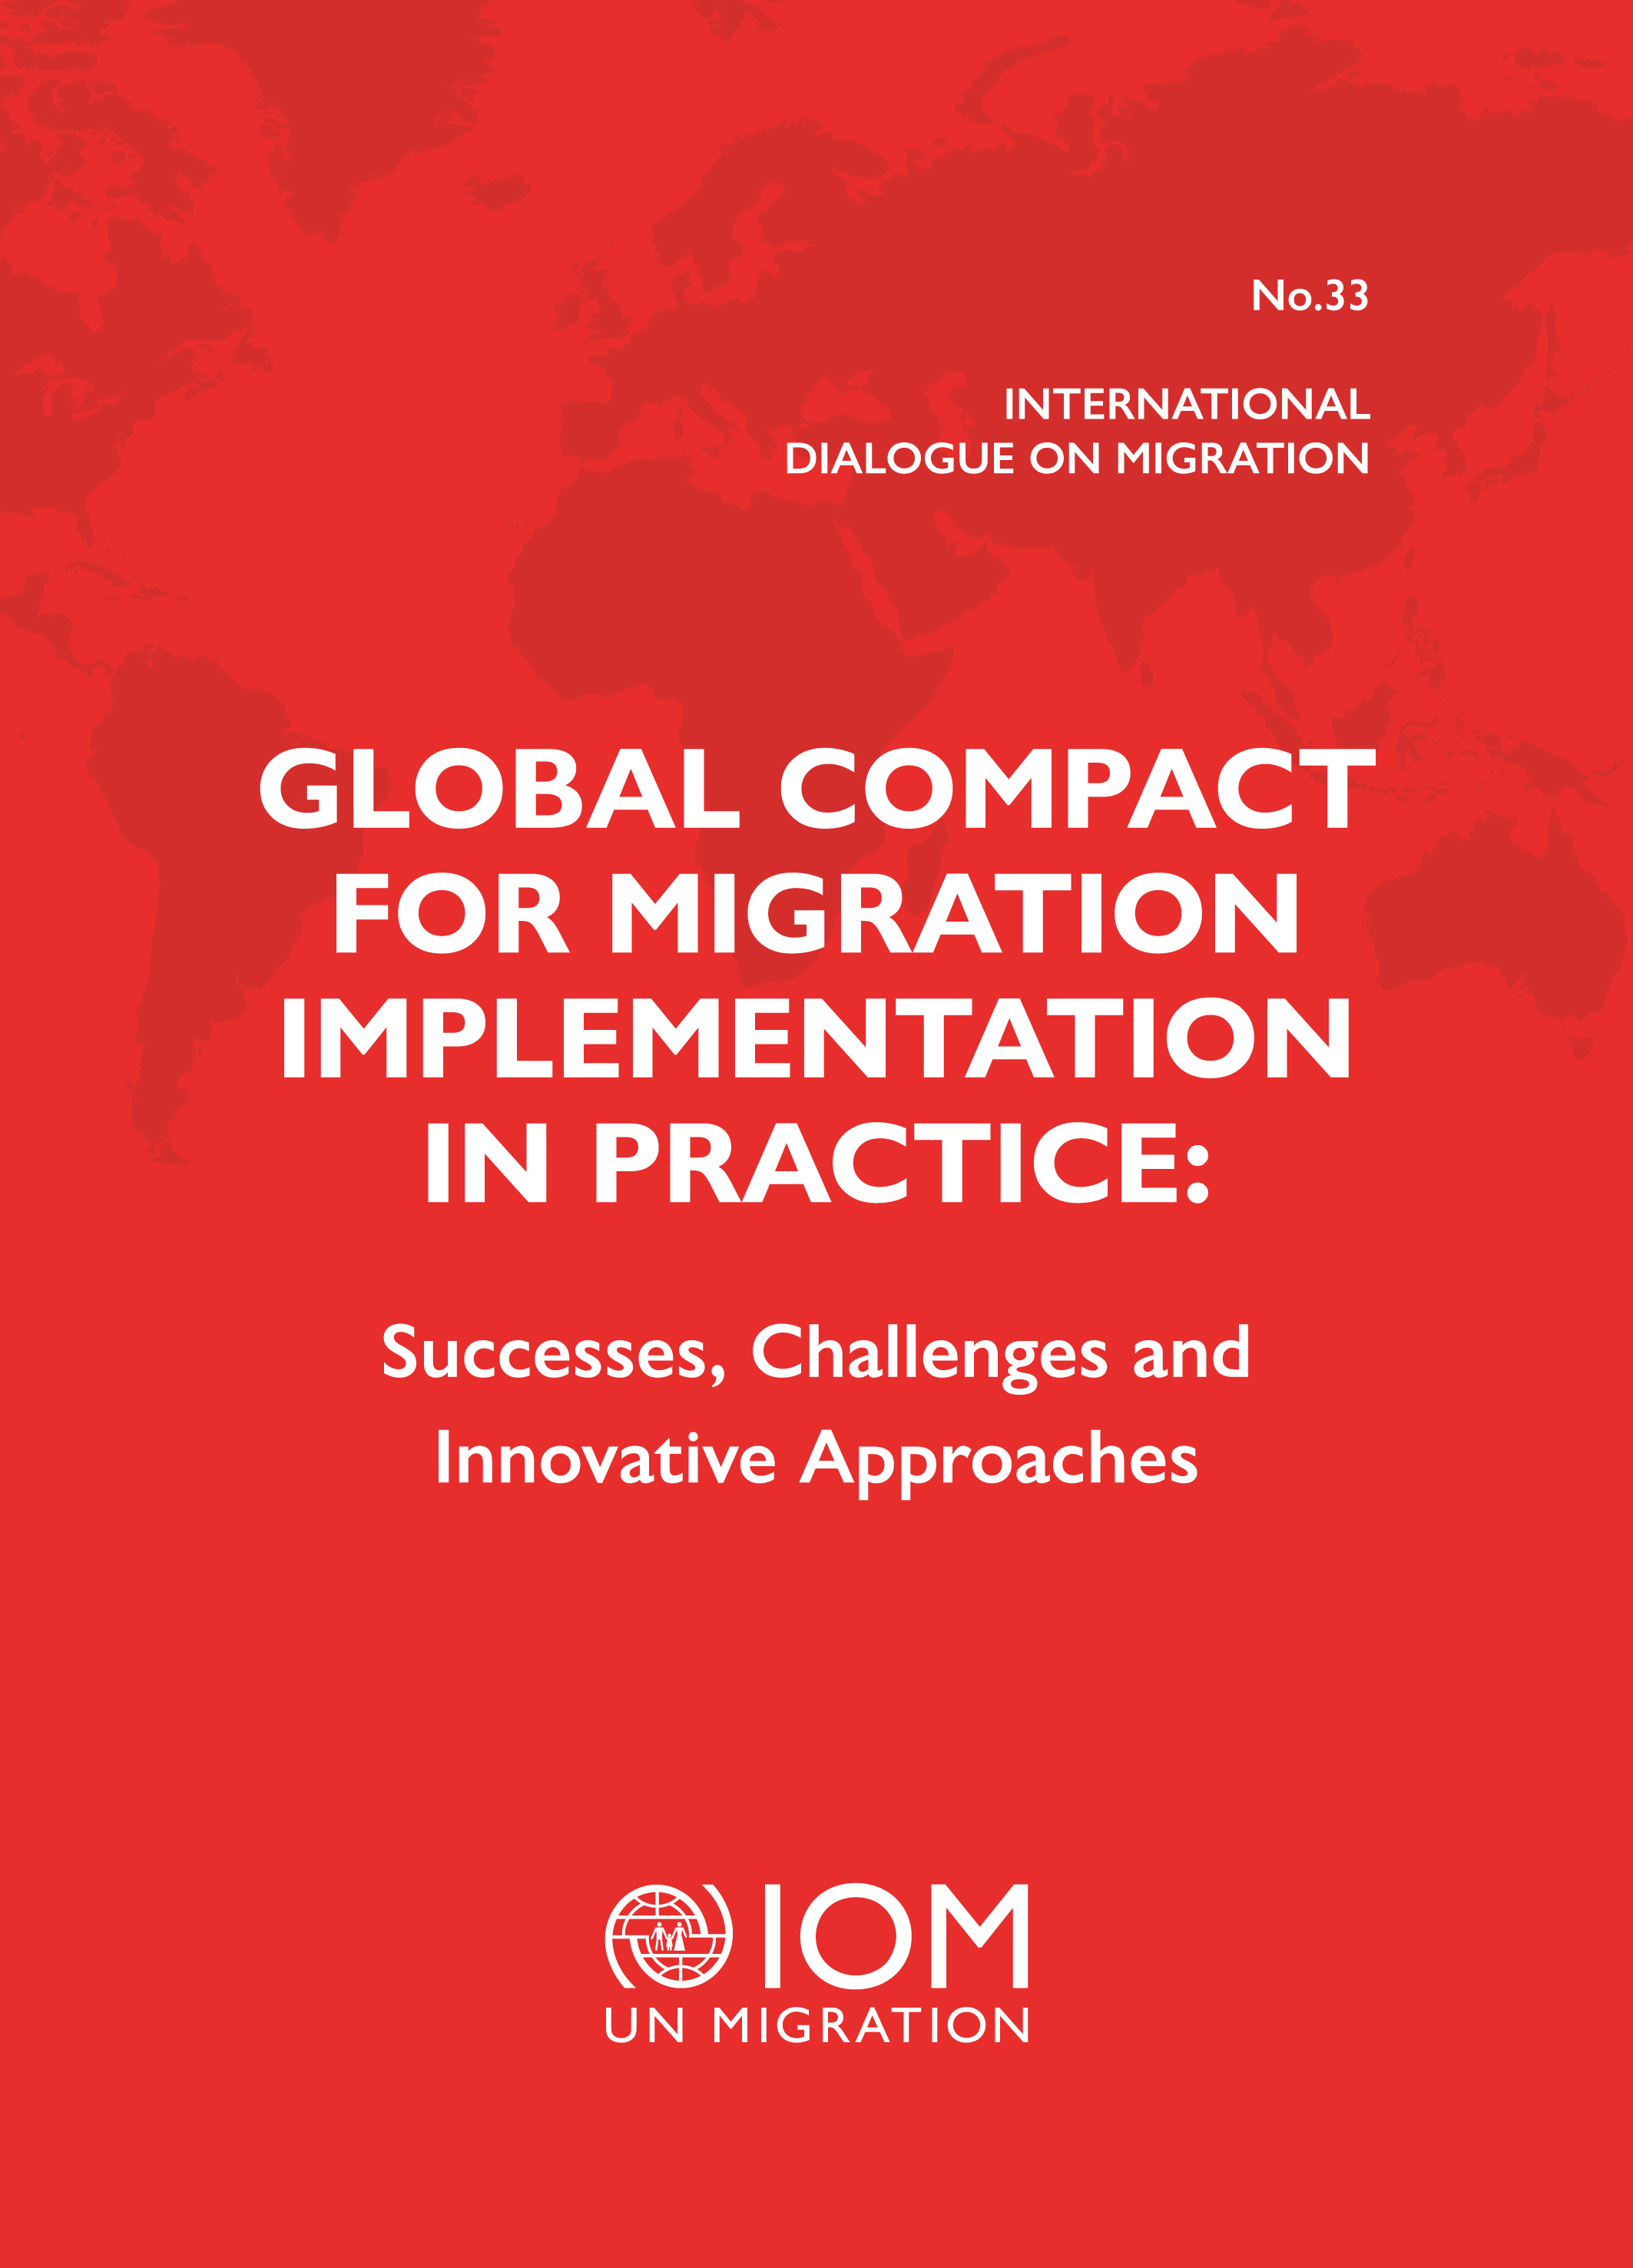 image of International Dialogue on Migration No. 33